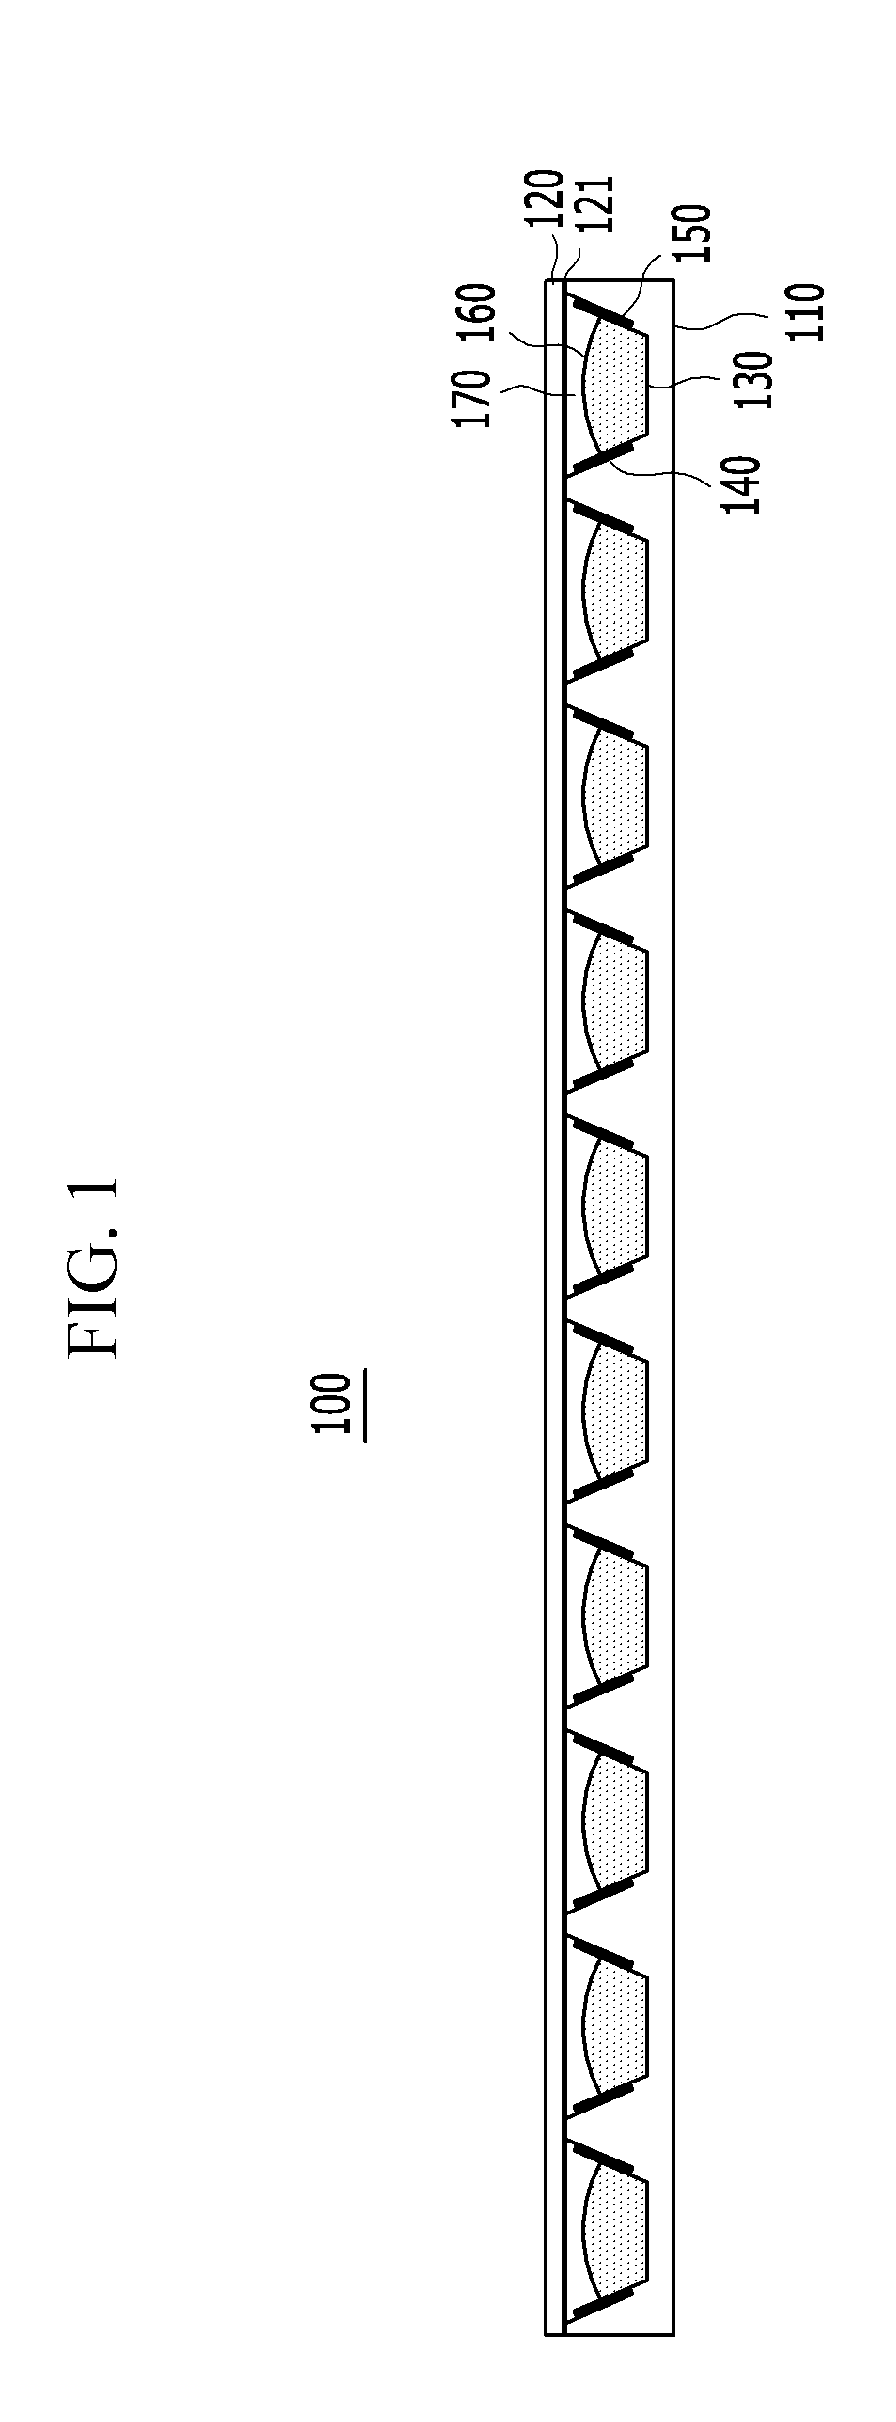 Liquid lens array based on electrowetting method and method of manufacturing the same, and display device using the same